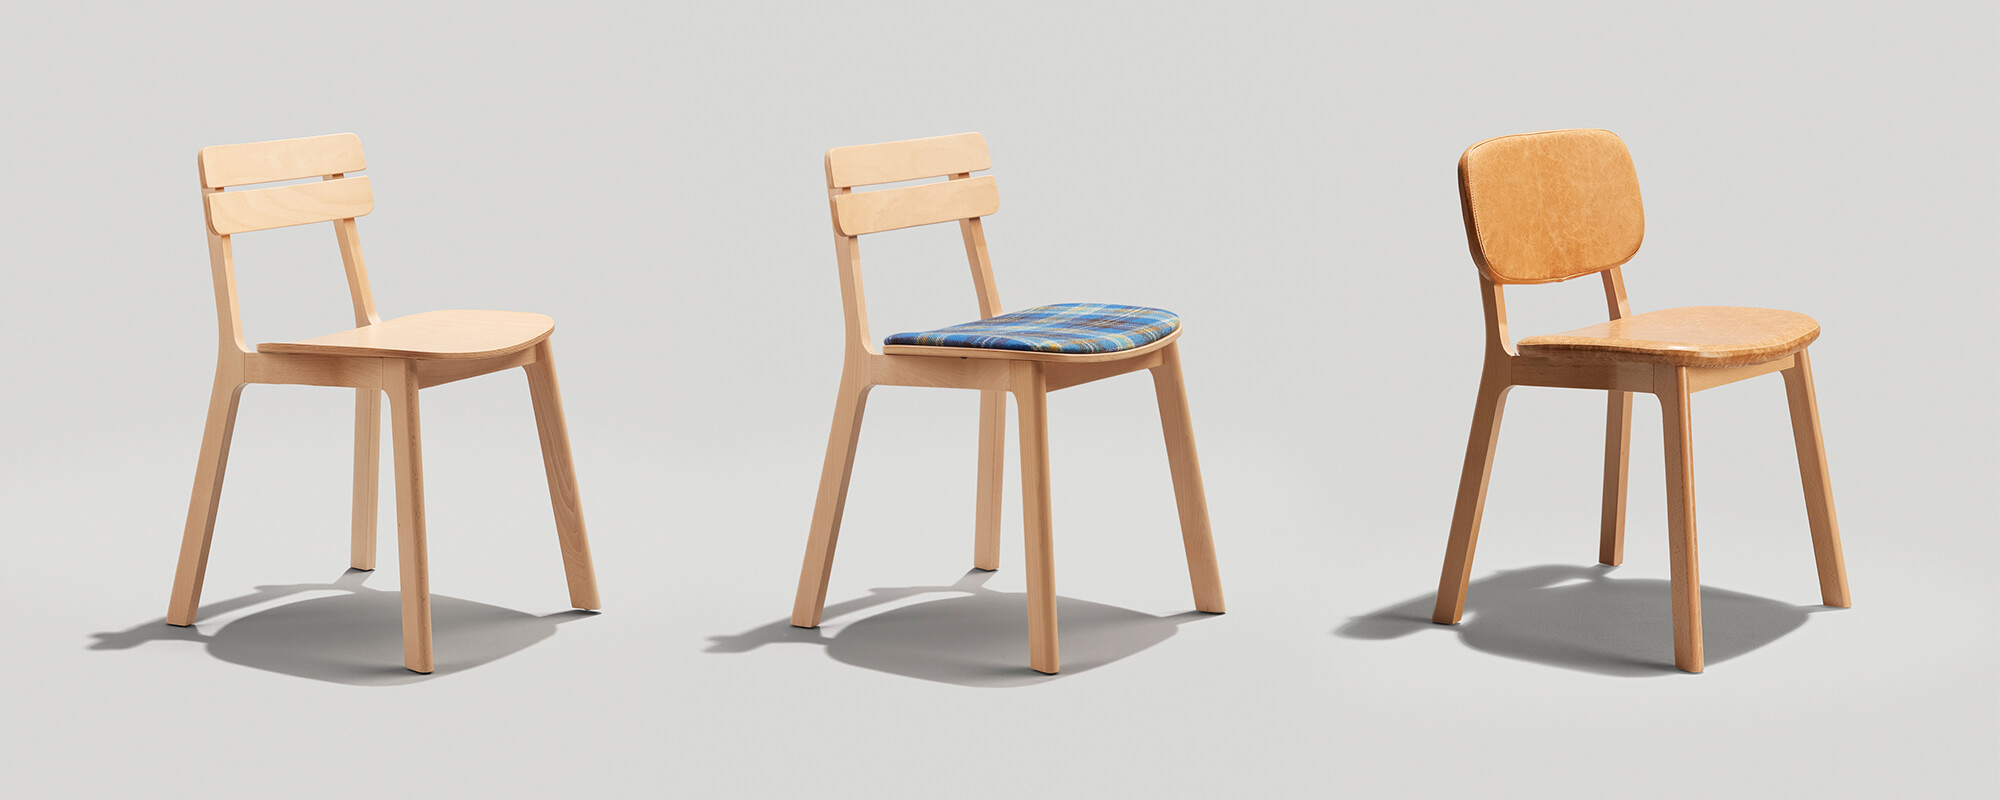 Brooke Wood Dinining Chair variations.